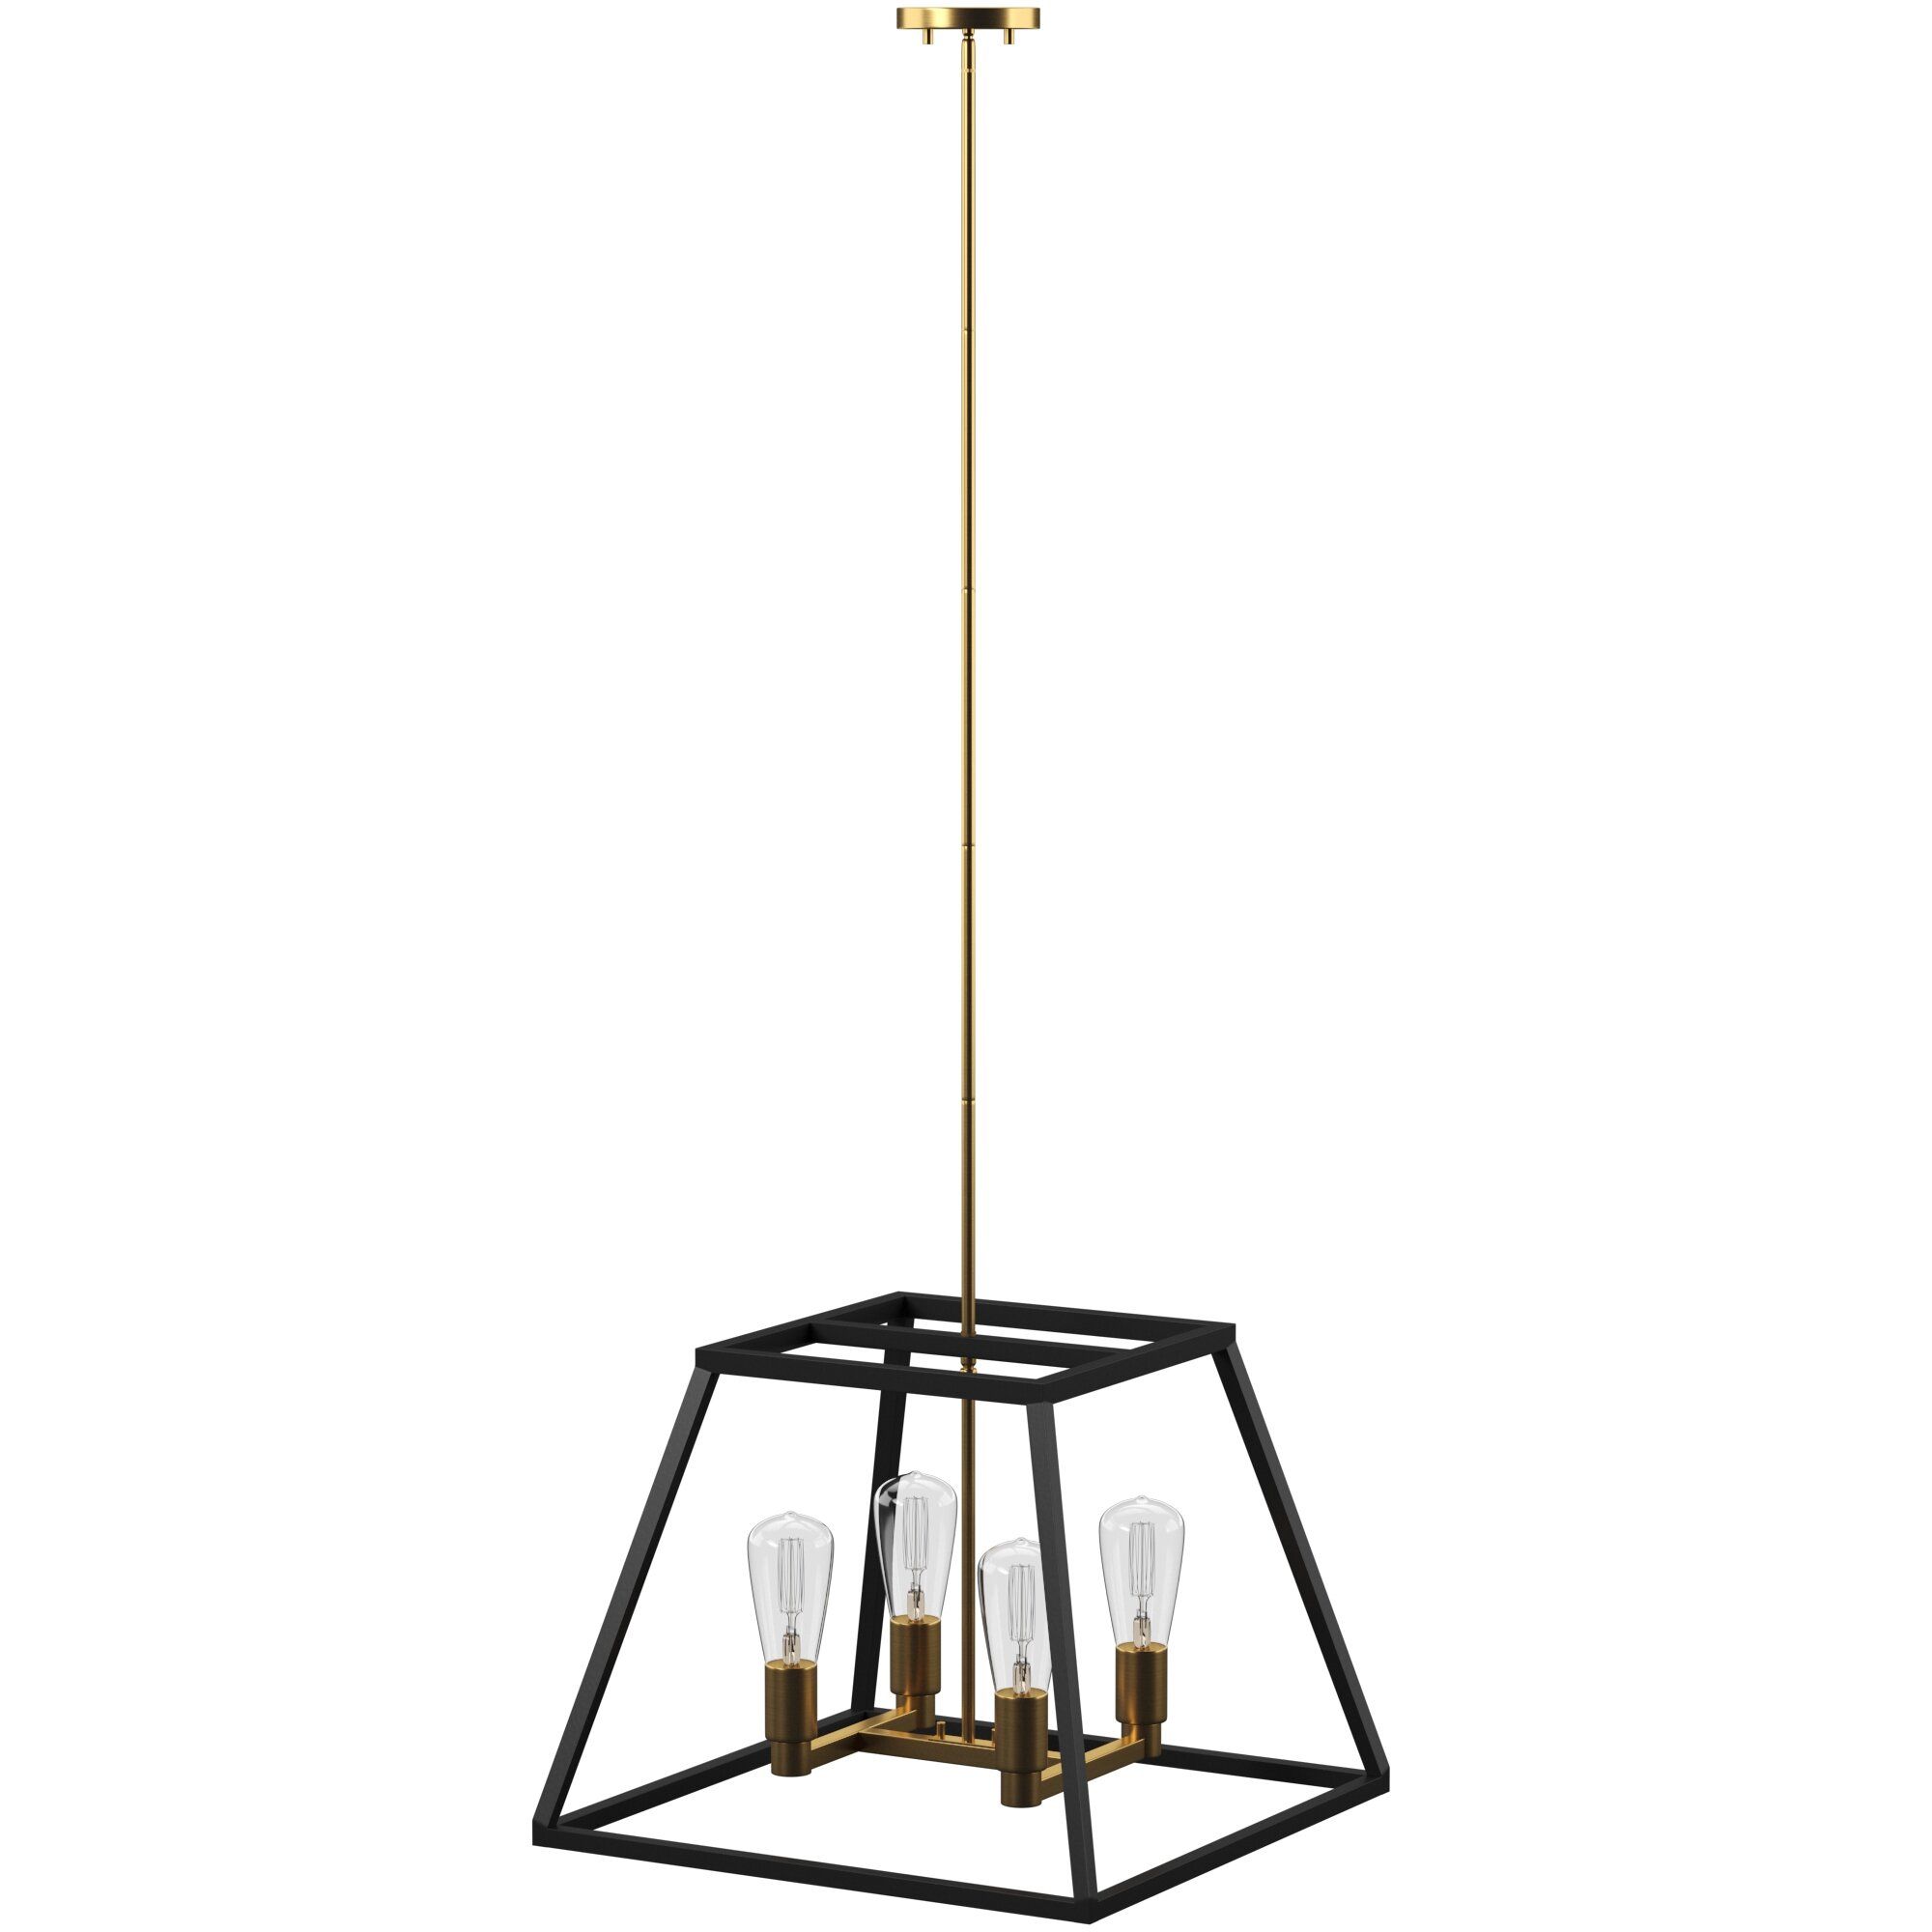 Shisler 4 Light Square/rectangle Chandelier With Tabit 5 Light Geometric Chandeliers (View 17 of 30)